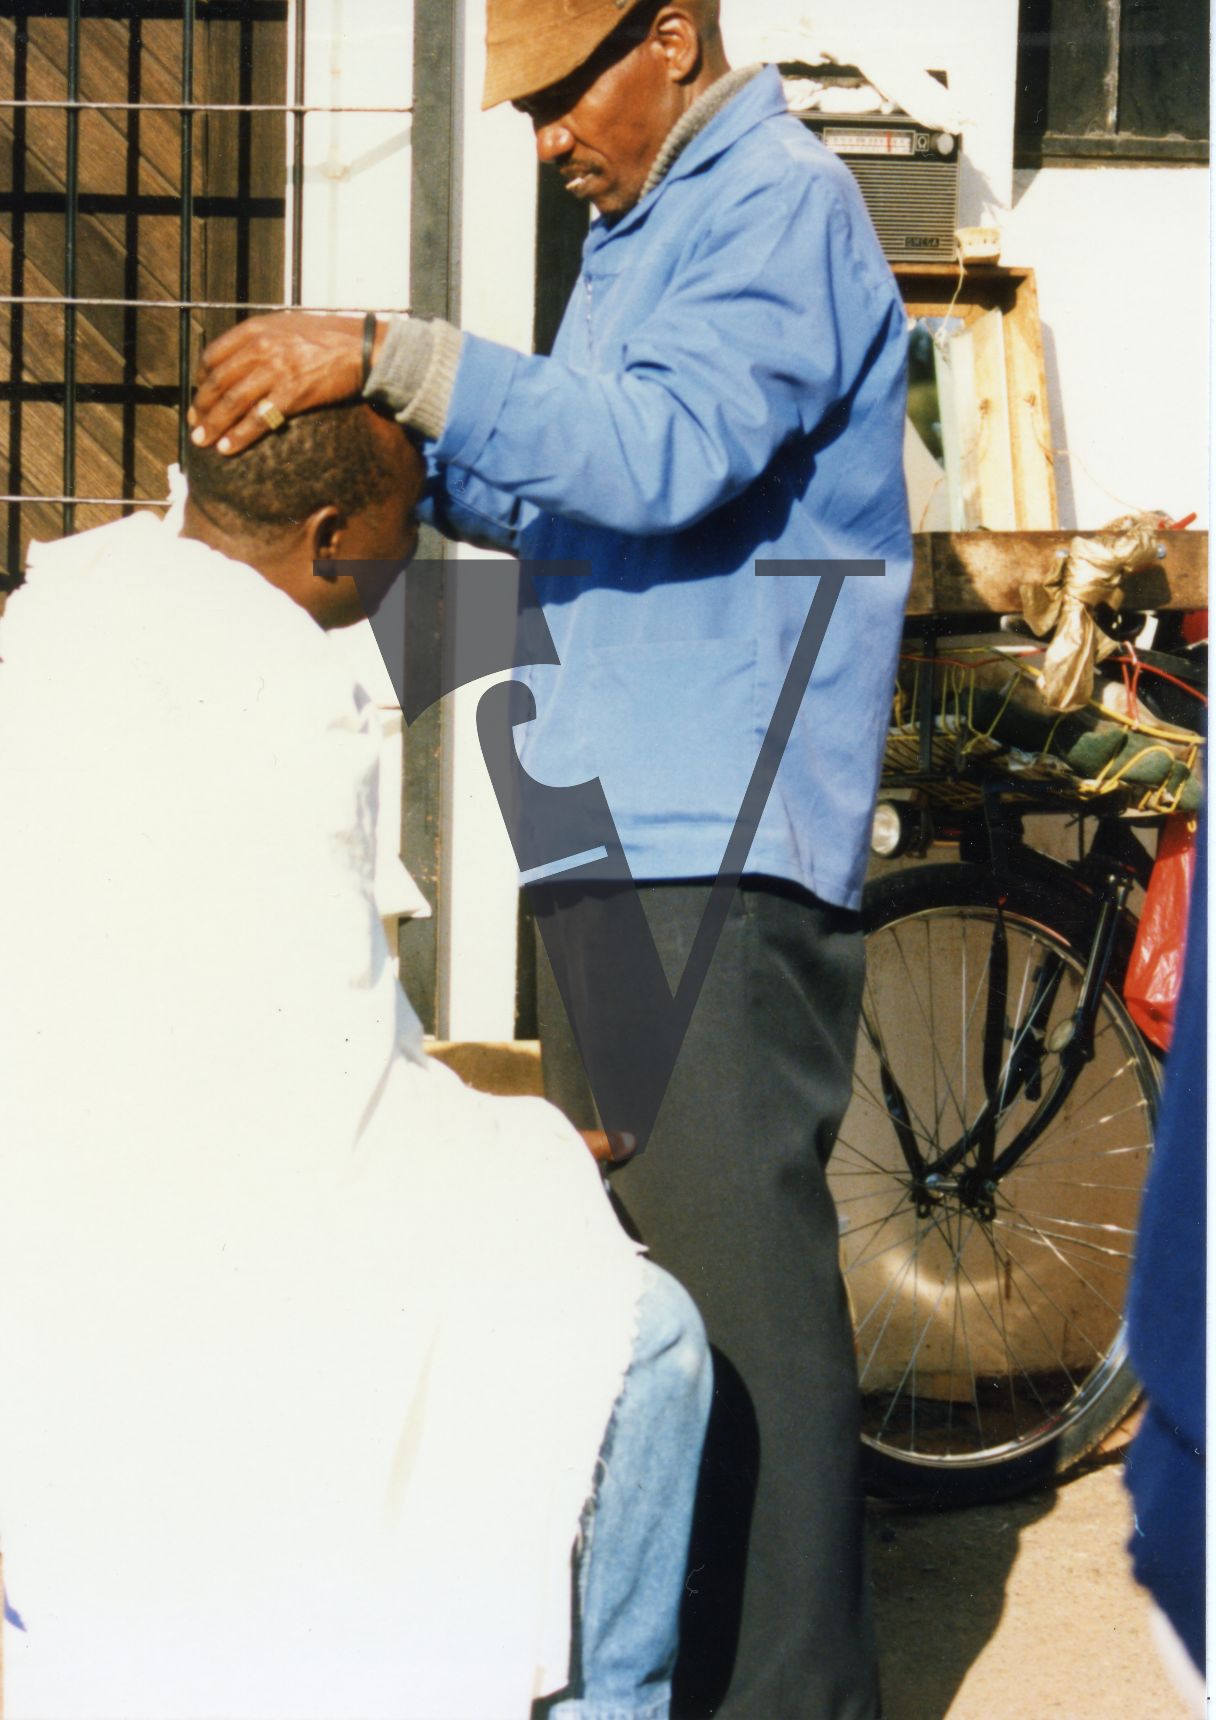 South Africa, man in chair, barber, haircut, exterior.